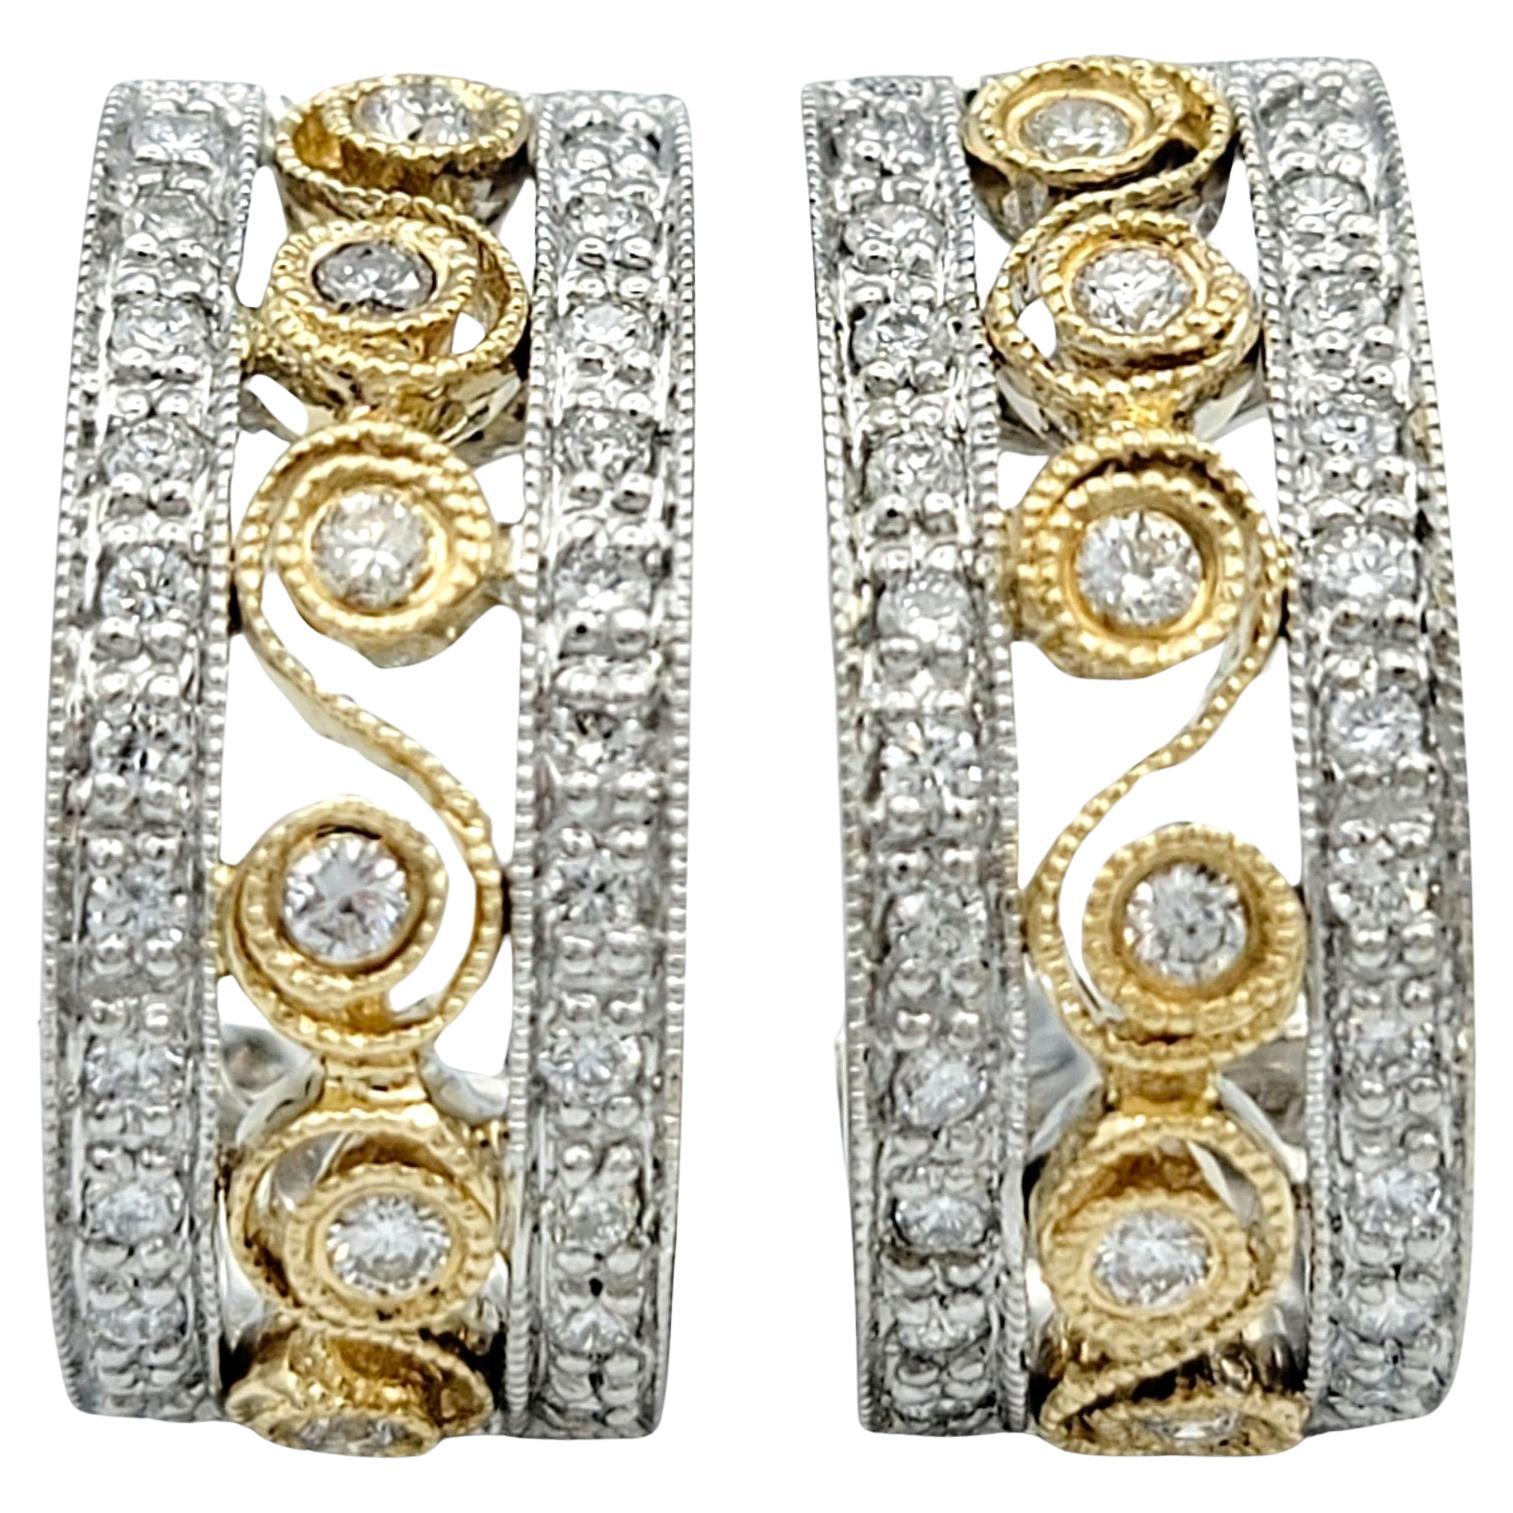 This pair of J-hoop earrings, set in a beautiful combination of 14 karat yellow and white gold, showcases a sophisticated and intricate design. The center of each hoop features a column of diamonds set within a yellow gold scroll-like pattern,